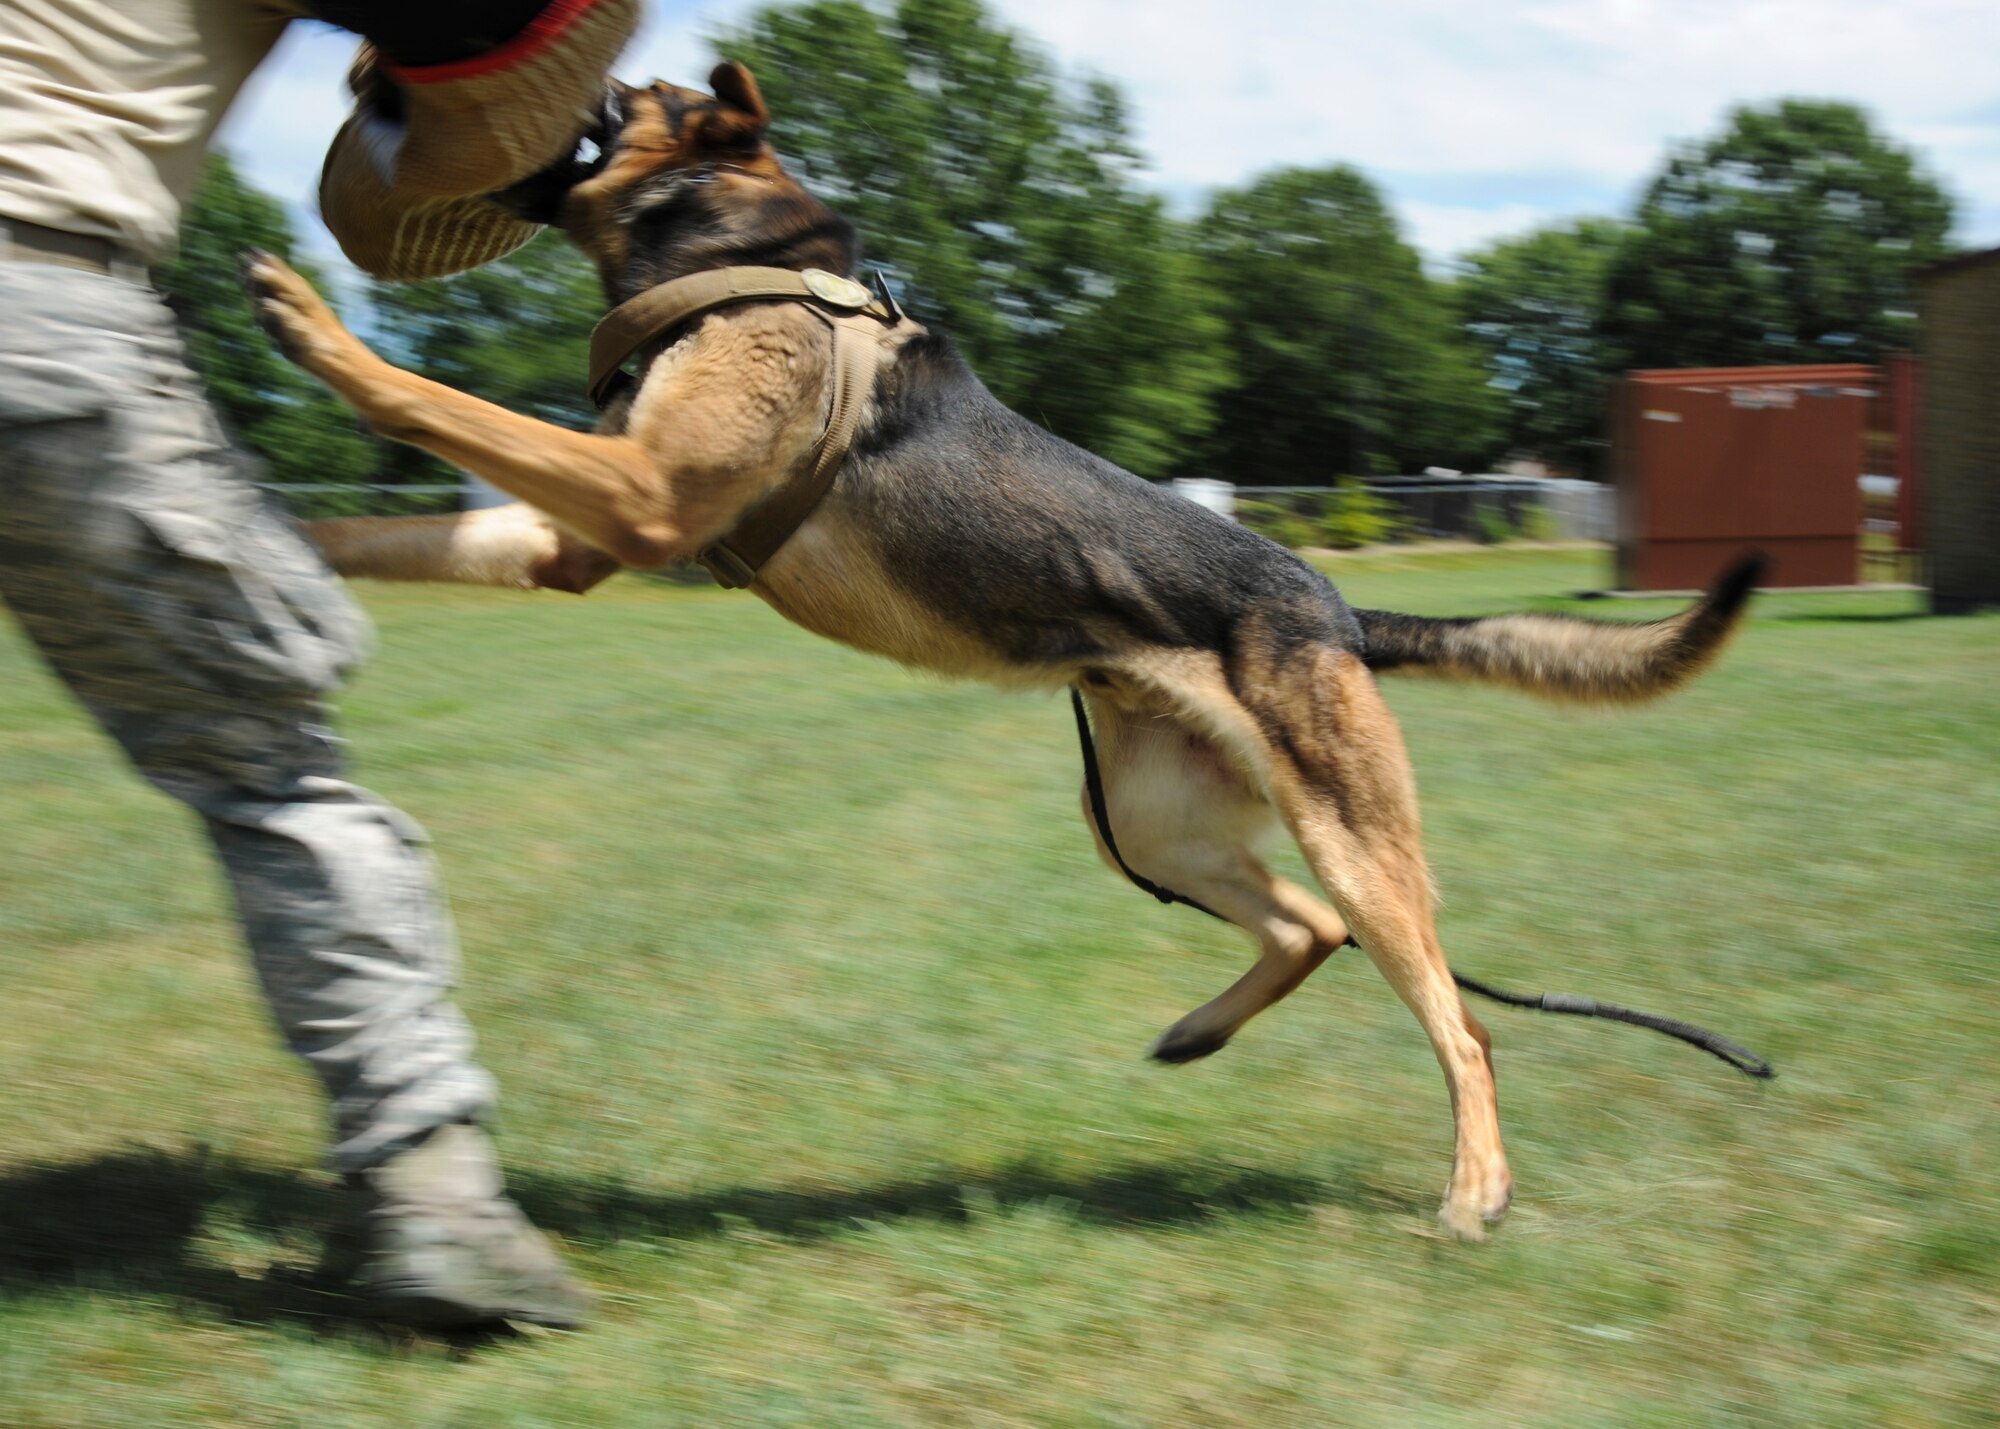 U.S. Air Force military working dog Toni, assigned to the 633rd Security Forces Squadron, attacks on command at Joint Base Langley-Eustis, Va., Aug. 4, 2017.